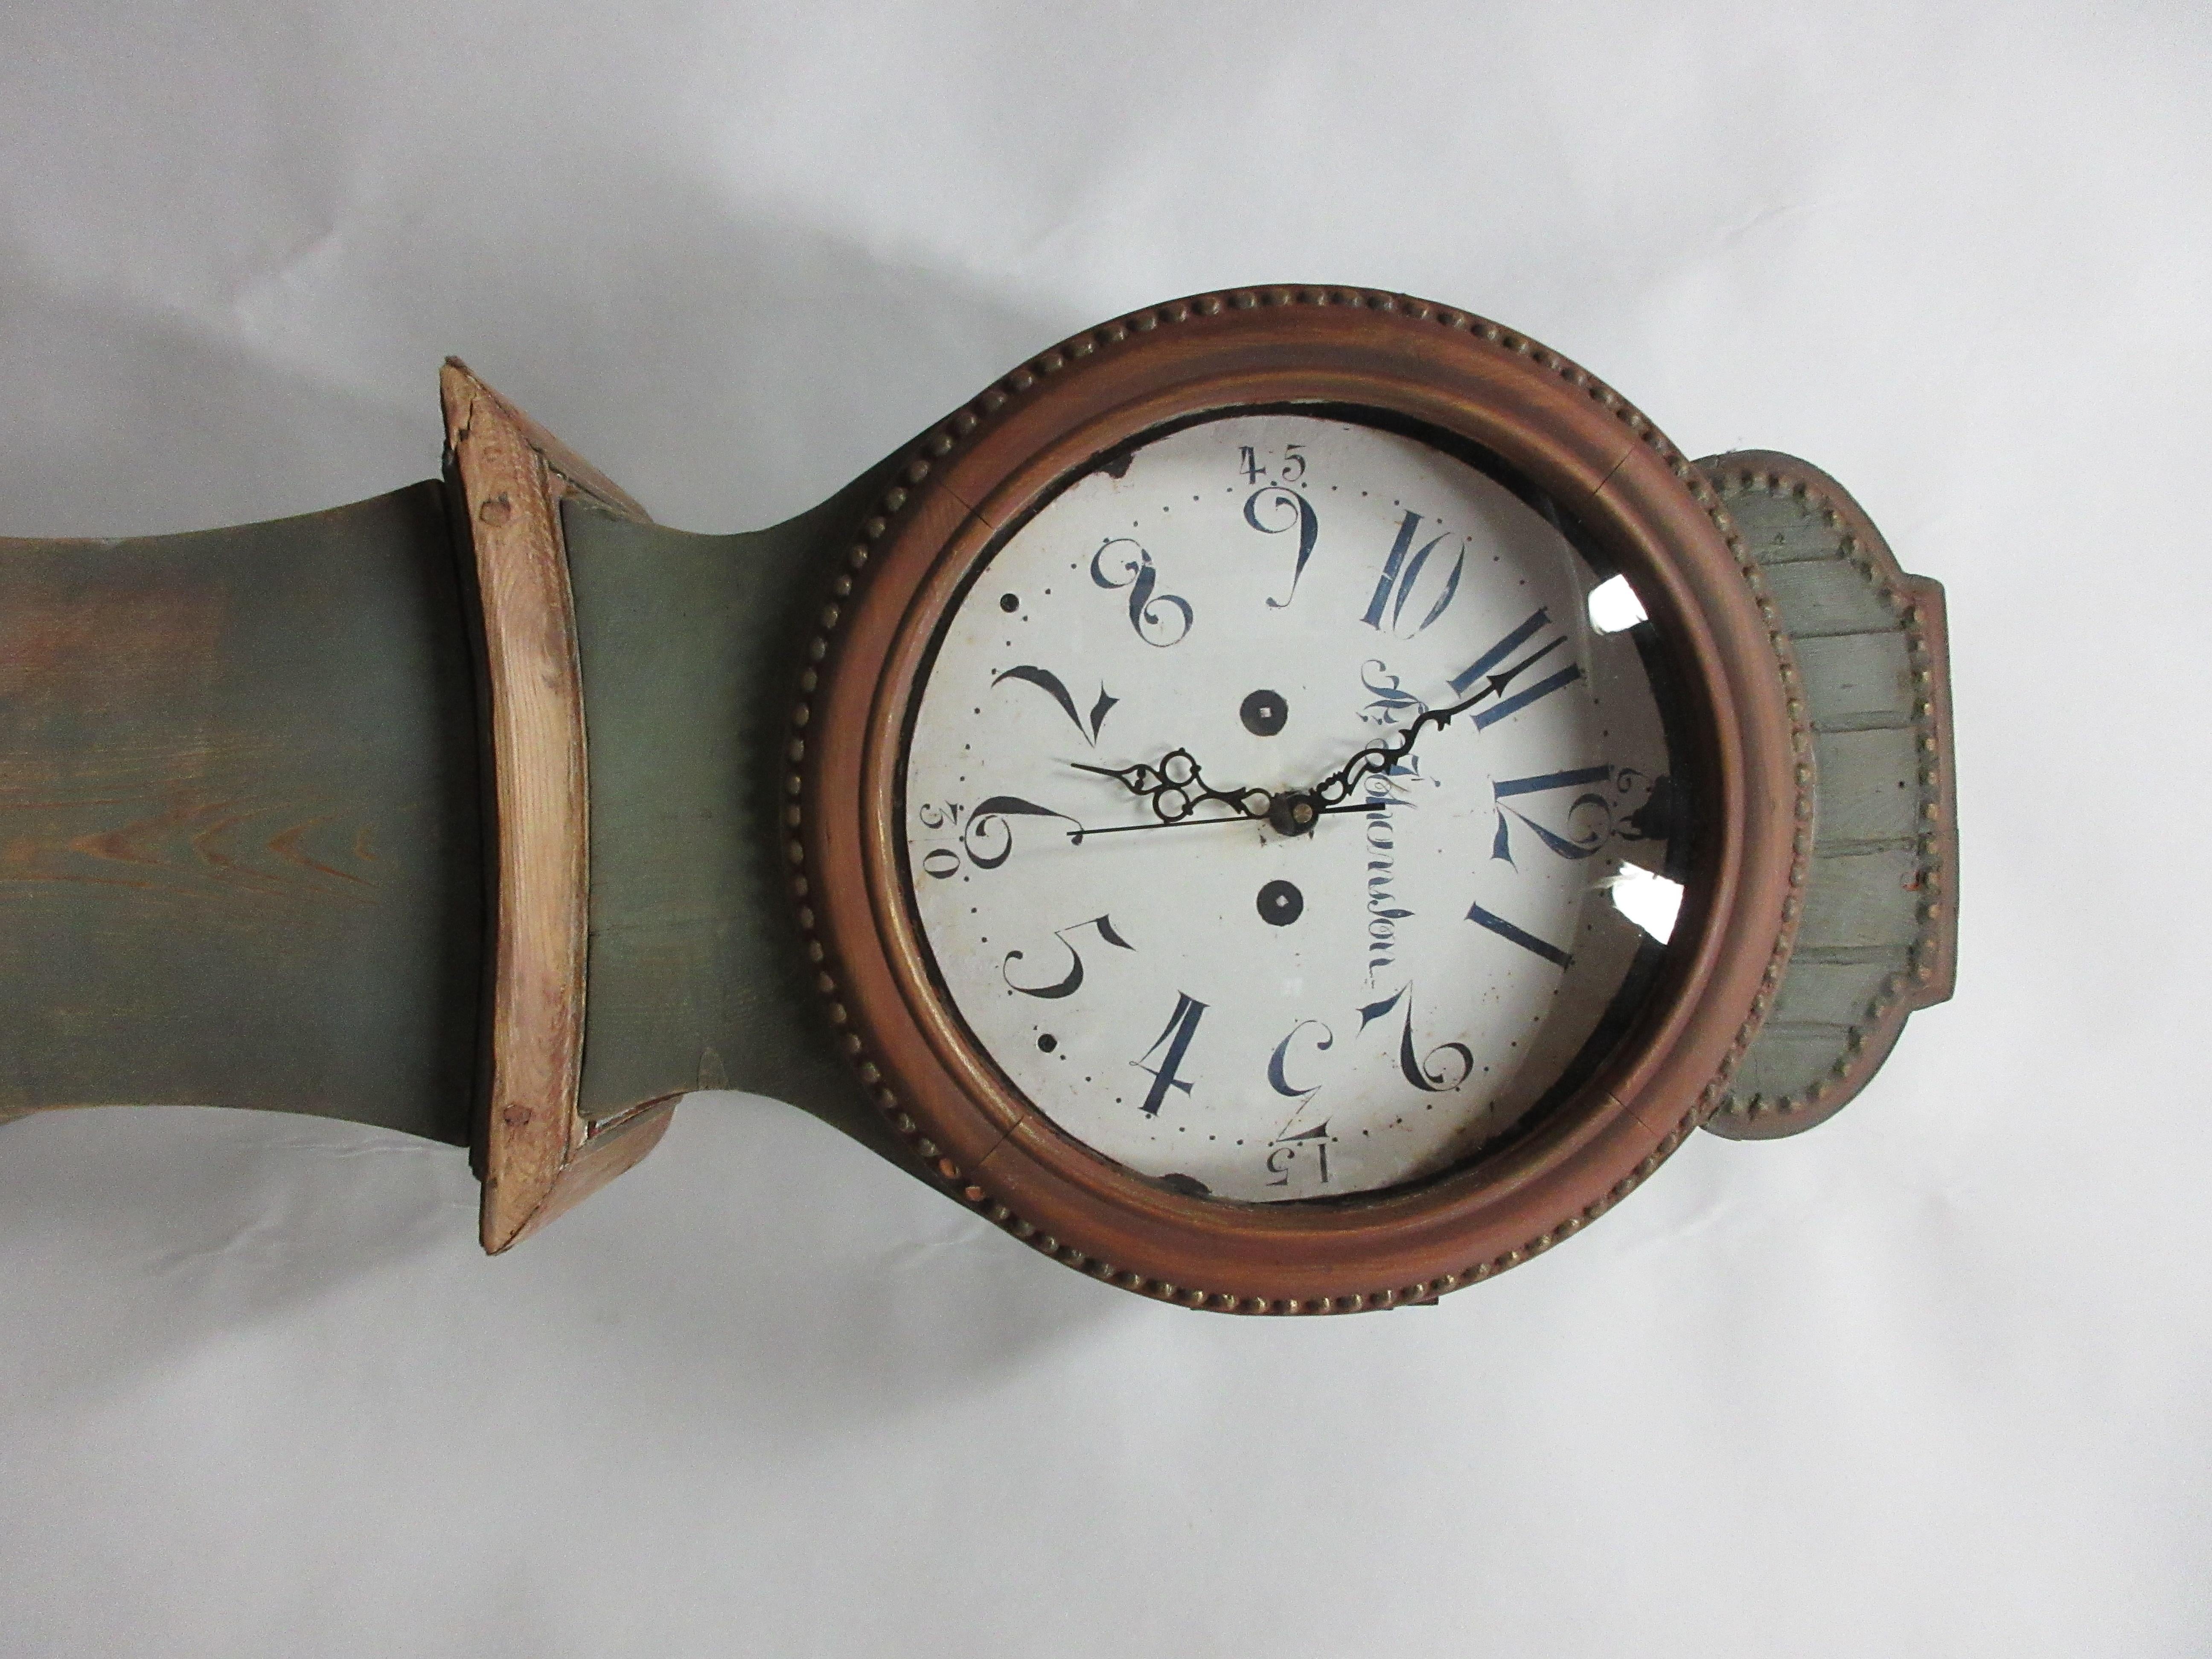 This is a very unusual 100% Original painted Swedish Mora Clock Sven Nilsson Morin Model . He made his clocks from 1780 to 1810 and is one of Sweden's most famous clock makers.